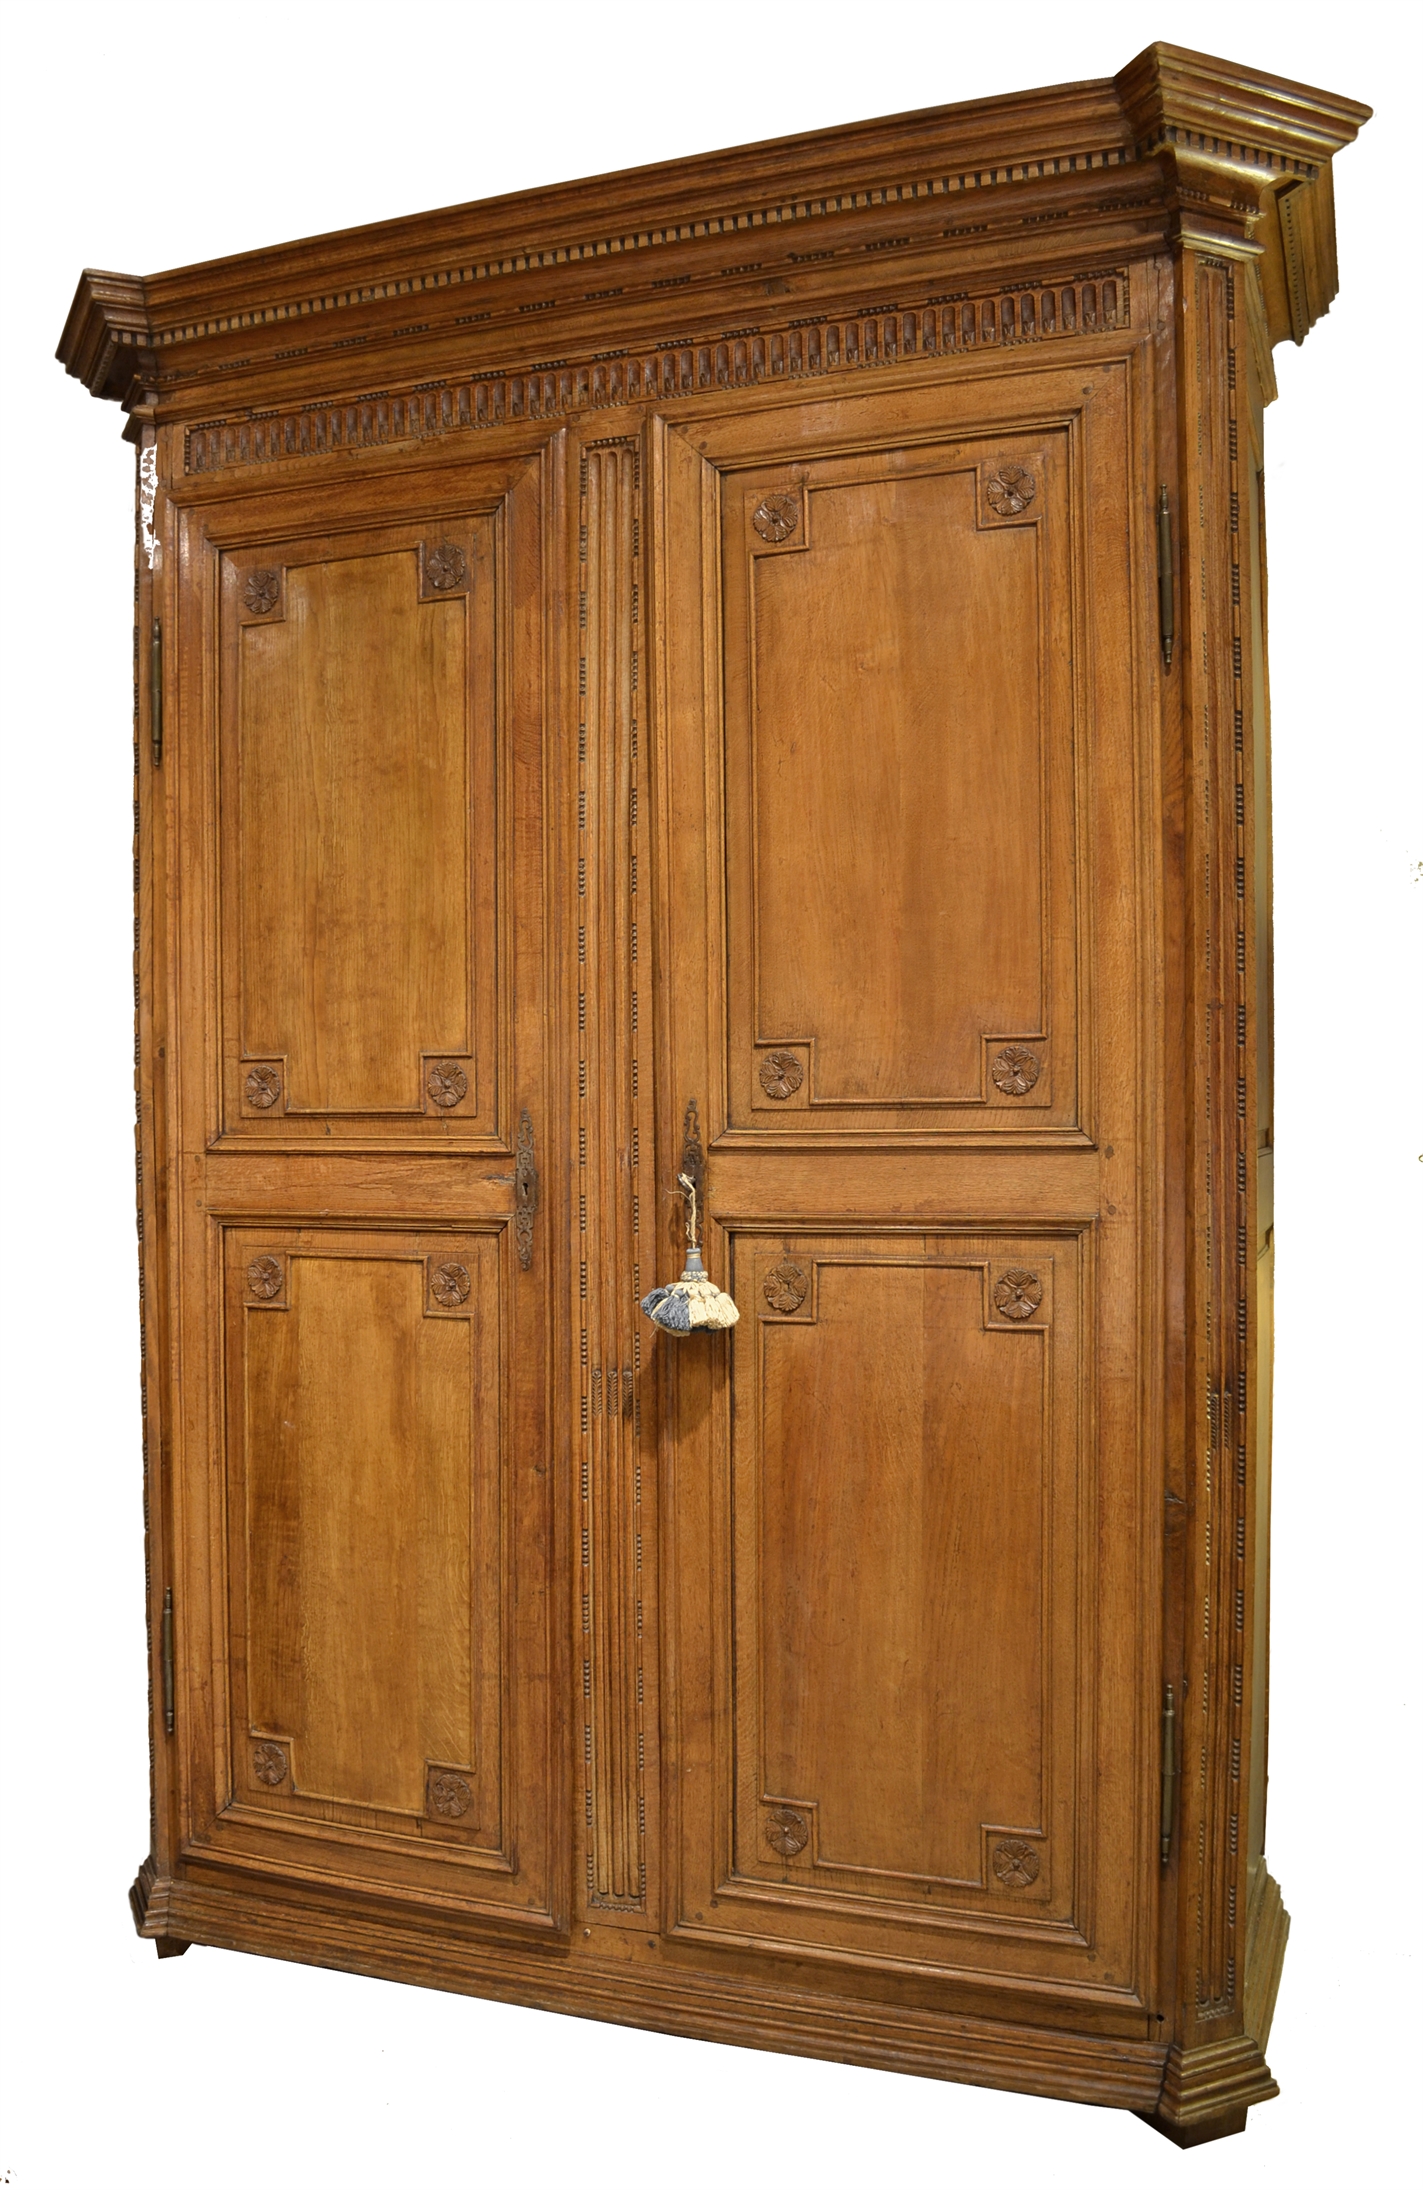 128/2069 - French Oak Armoire with Rosettes